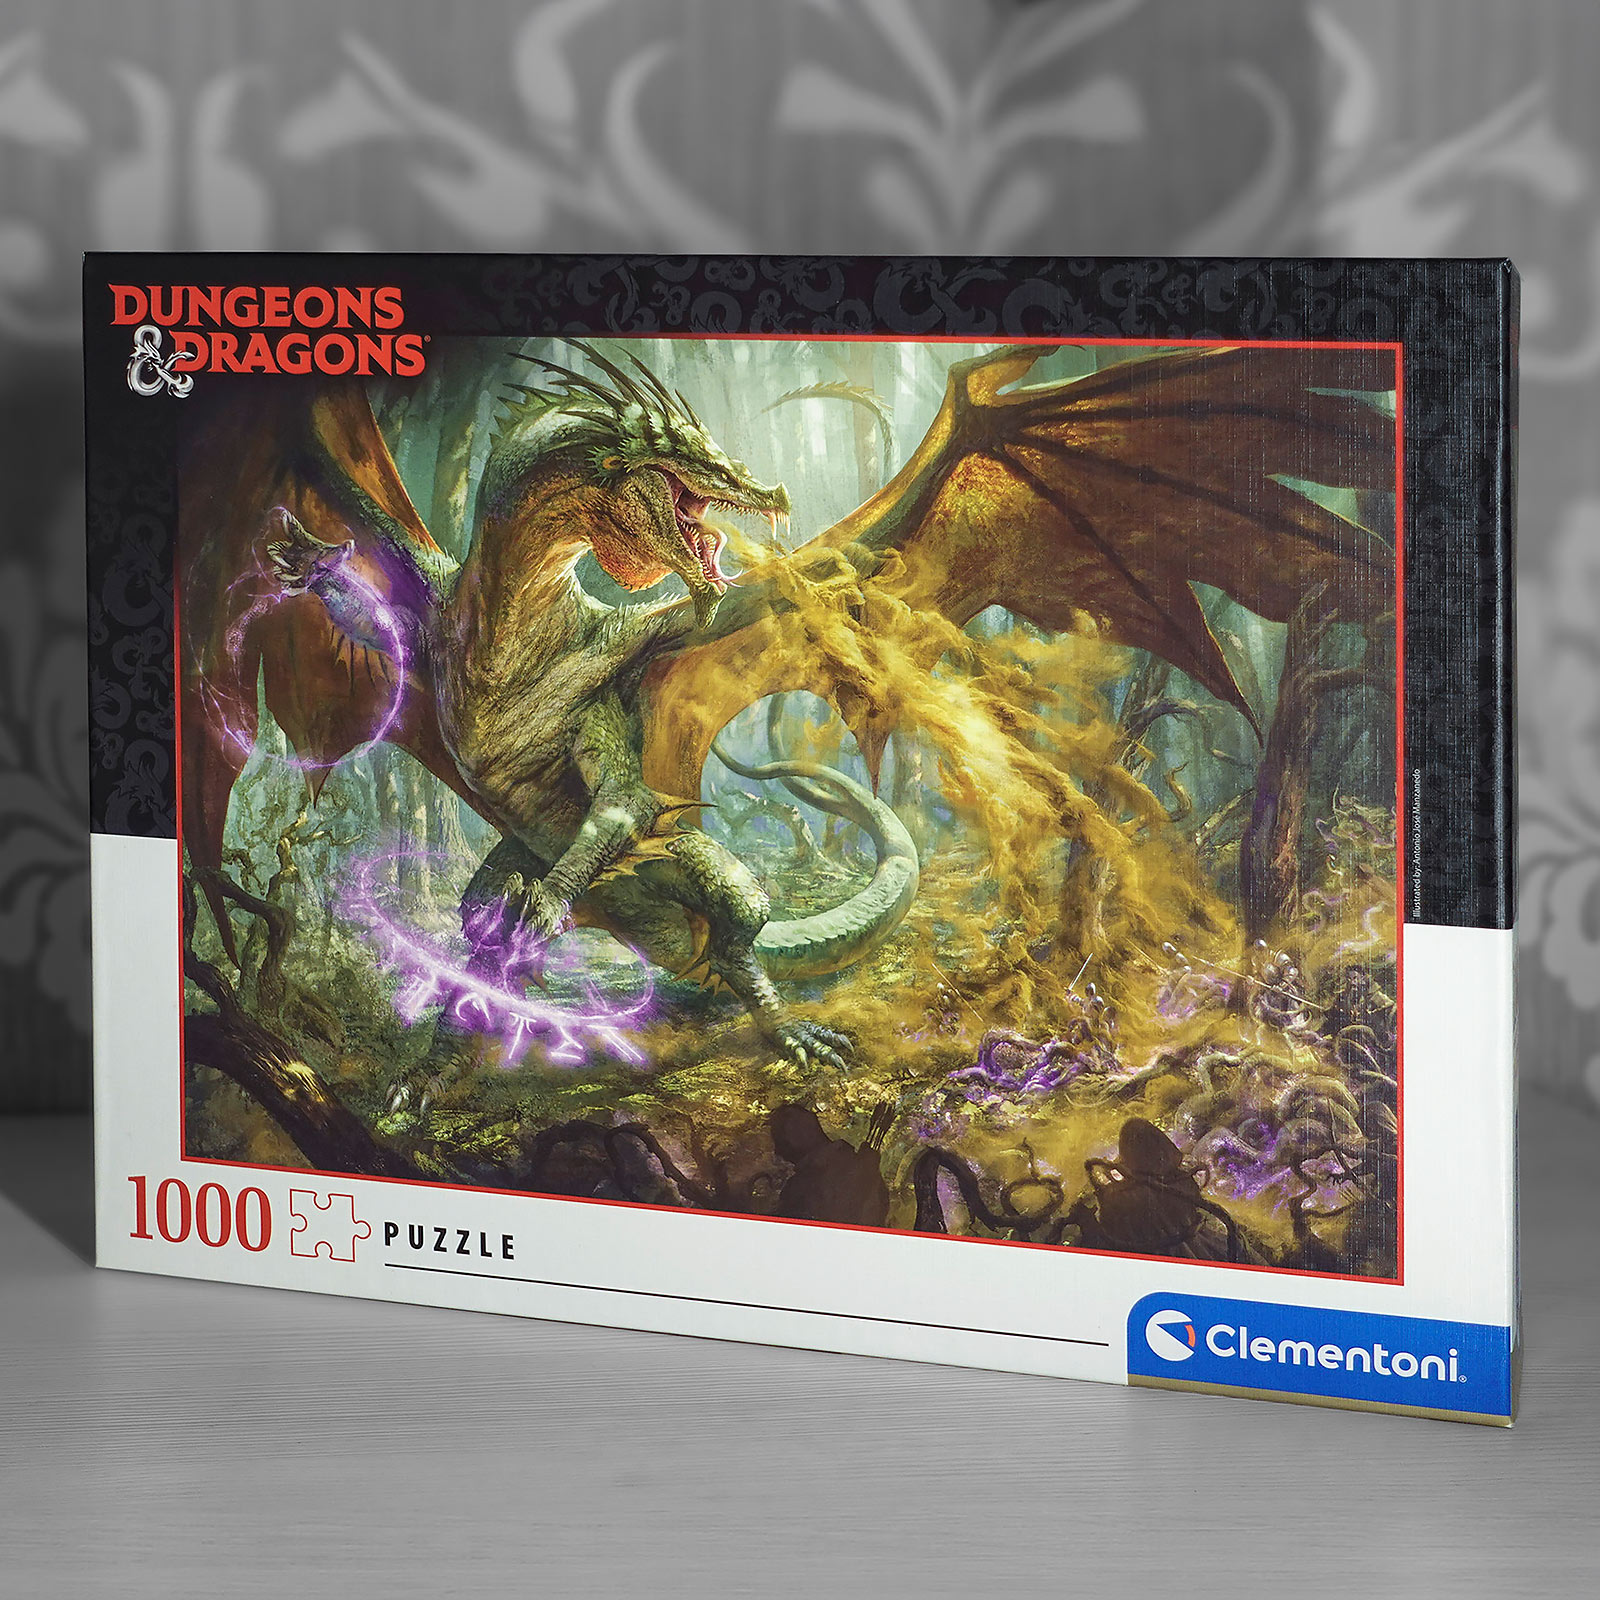 Dungeons & Dragons - Puzzel